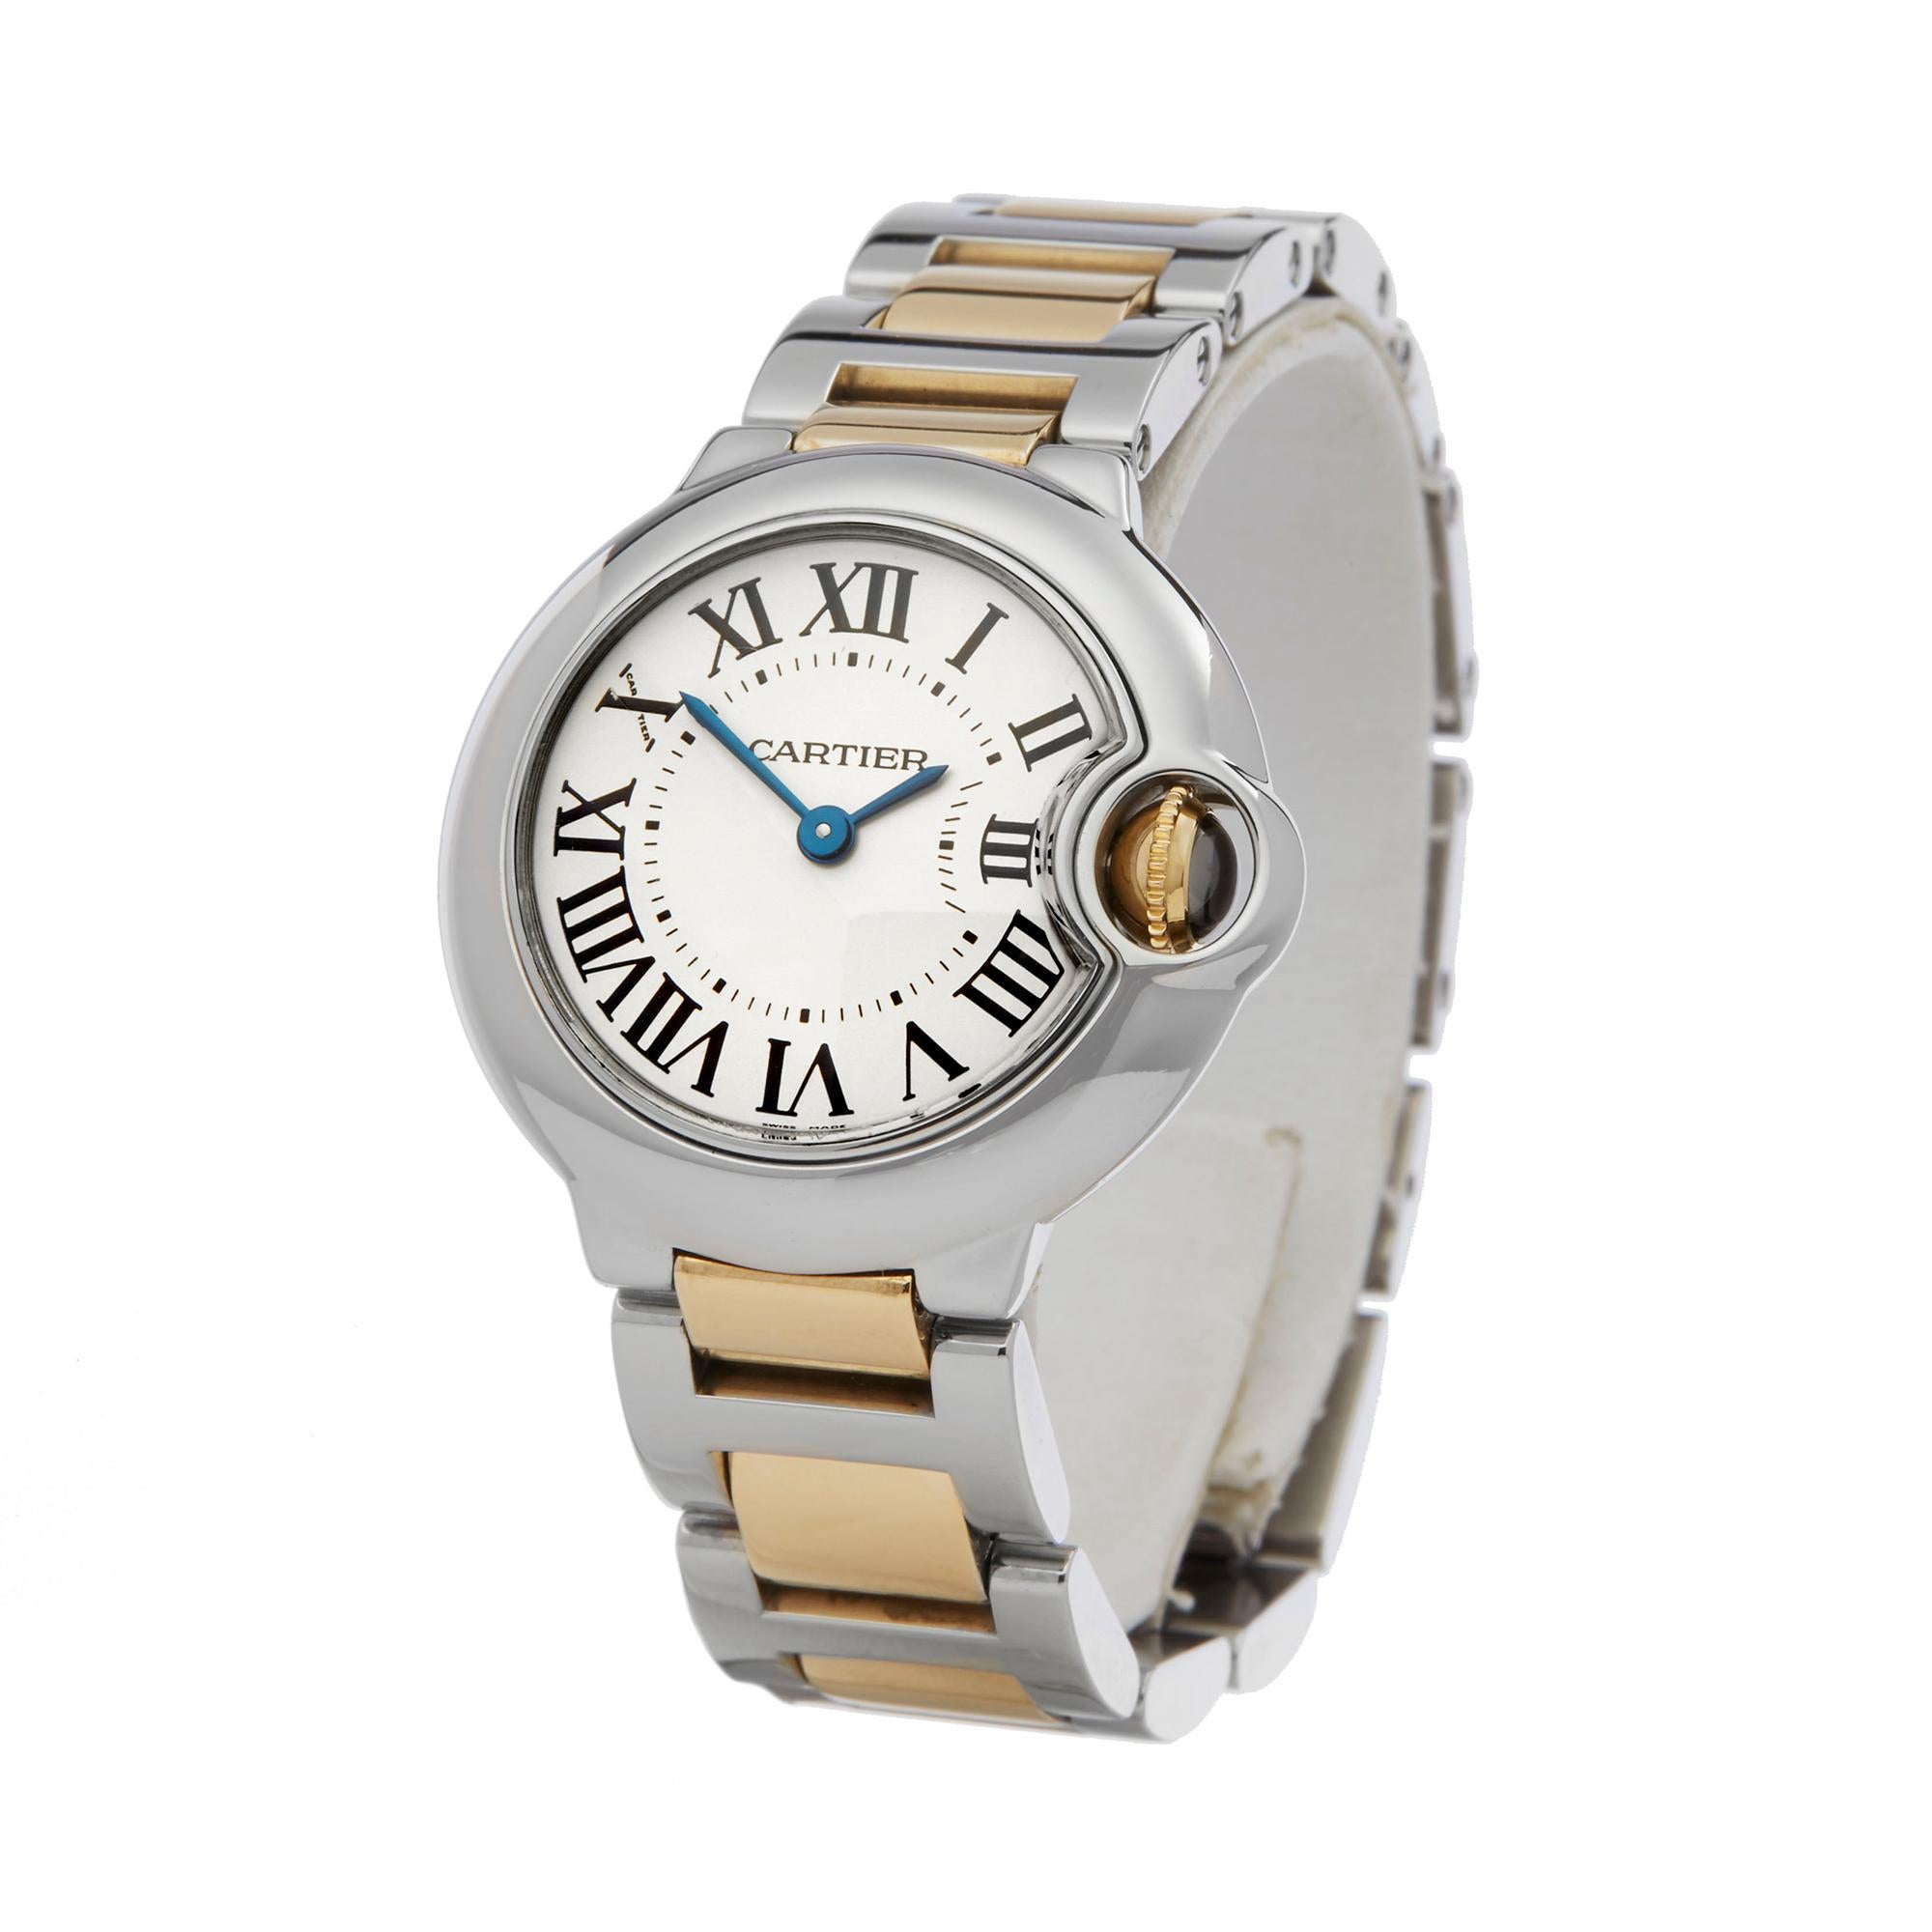 Ref: W6209
Manufacturer: Cartier
Model: Ballon Bleu 
Model Ref: 3009
Age: W6209
Gender: Ladies
Complete With: Box Only 
Dial: White Roman 
Glass: Sapphire Crystal
Movement: Quartz
Water Resistance: To Manufacturers Specifications
Case: Stainless